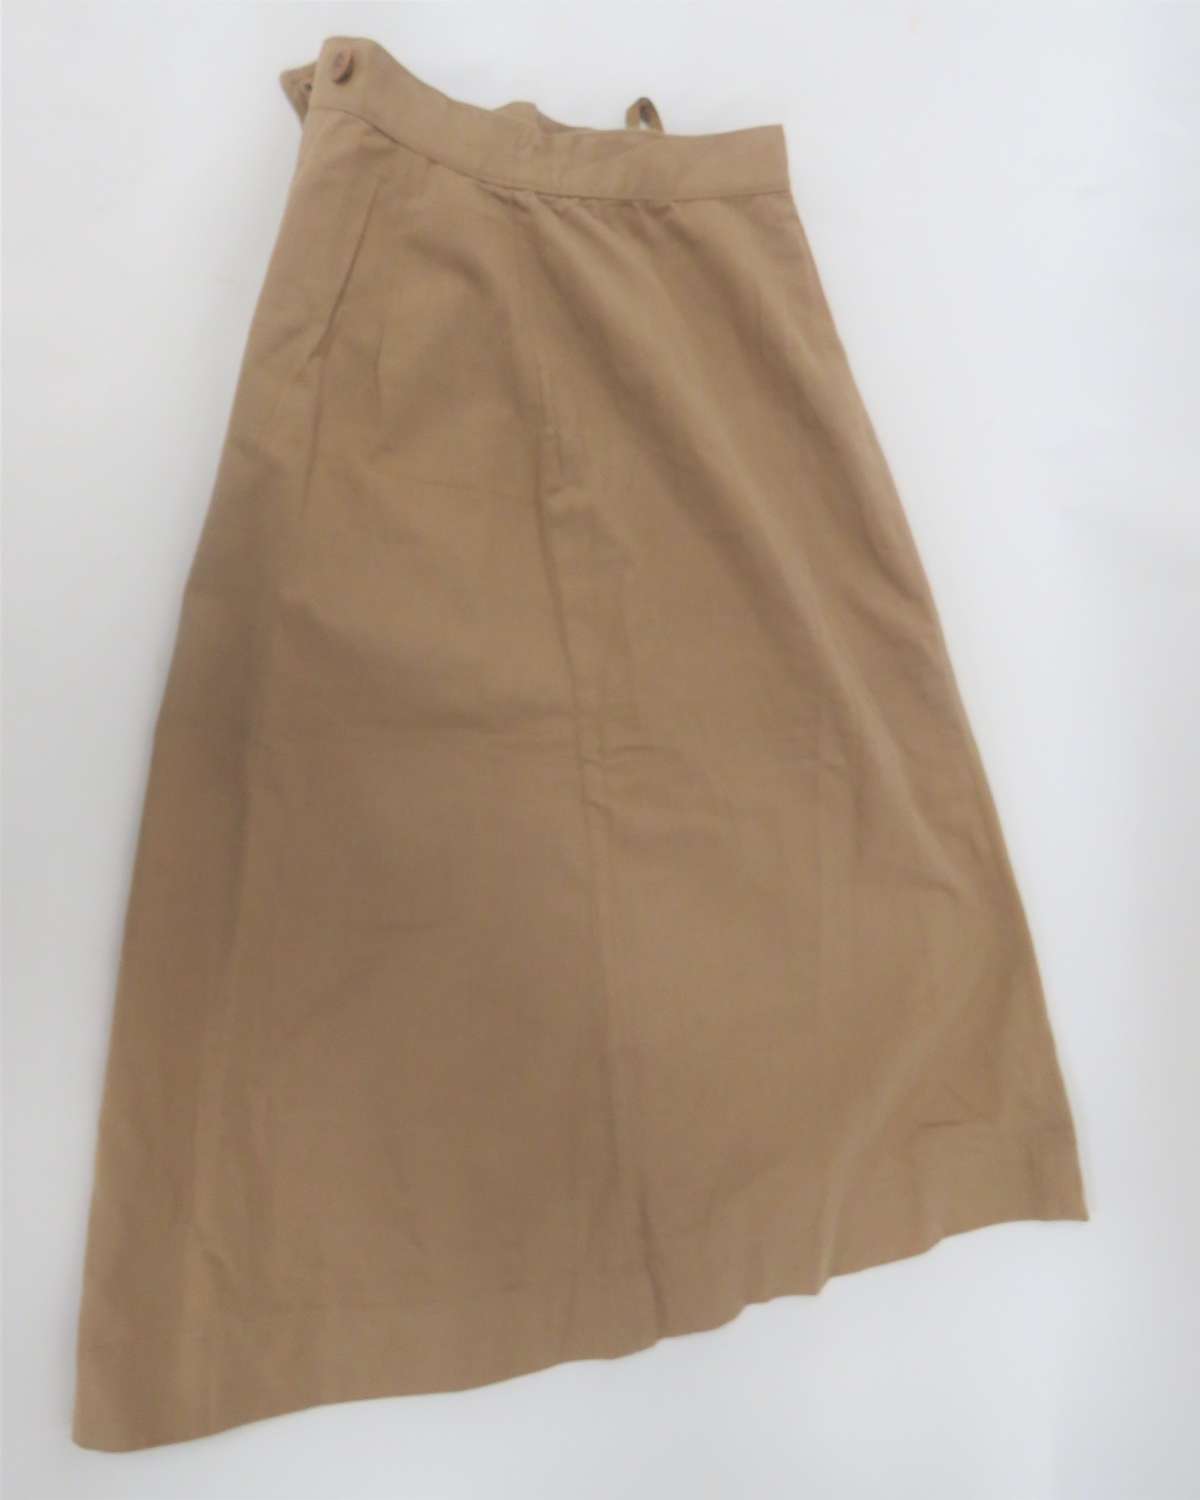 1941 Pattern A.T.S Issue Skirt